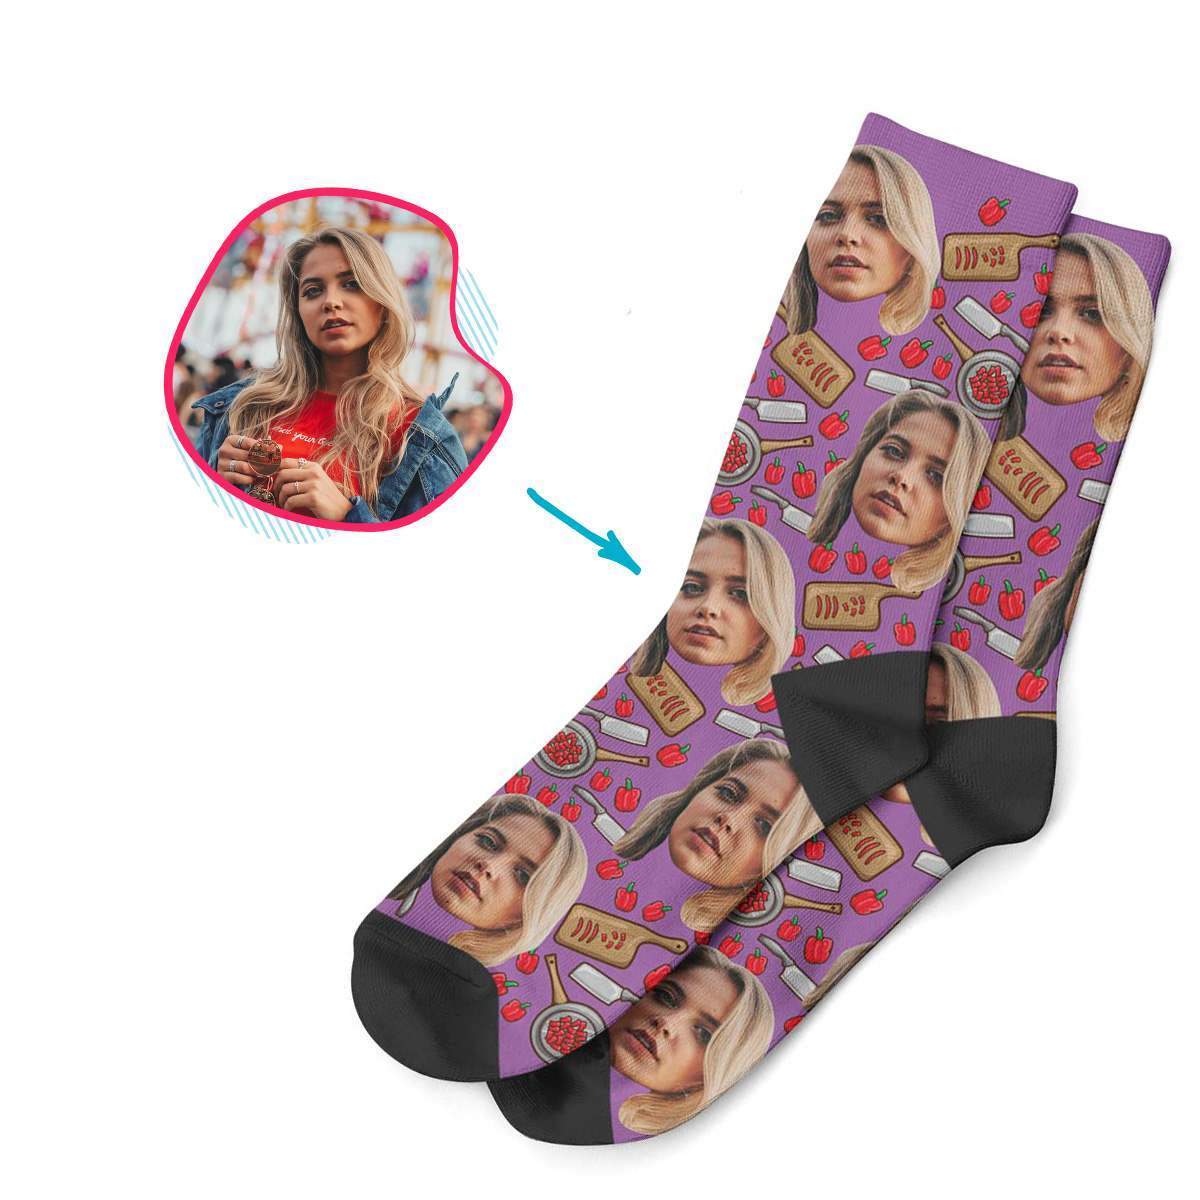 purple Сooking socks personalized with photo of face printed on them